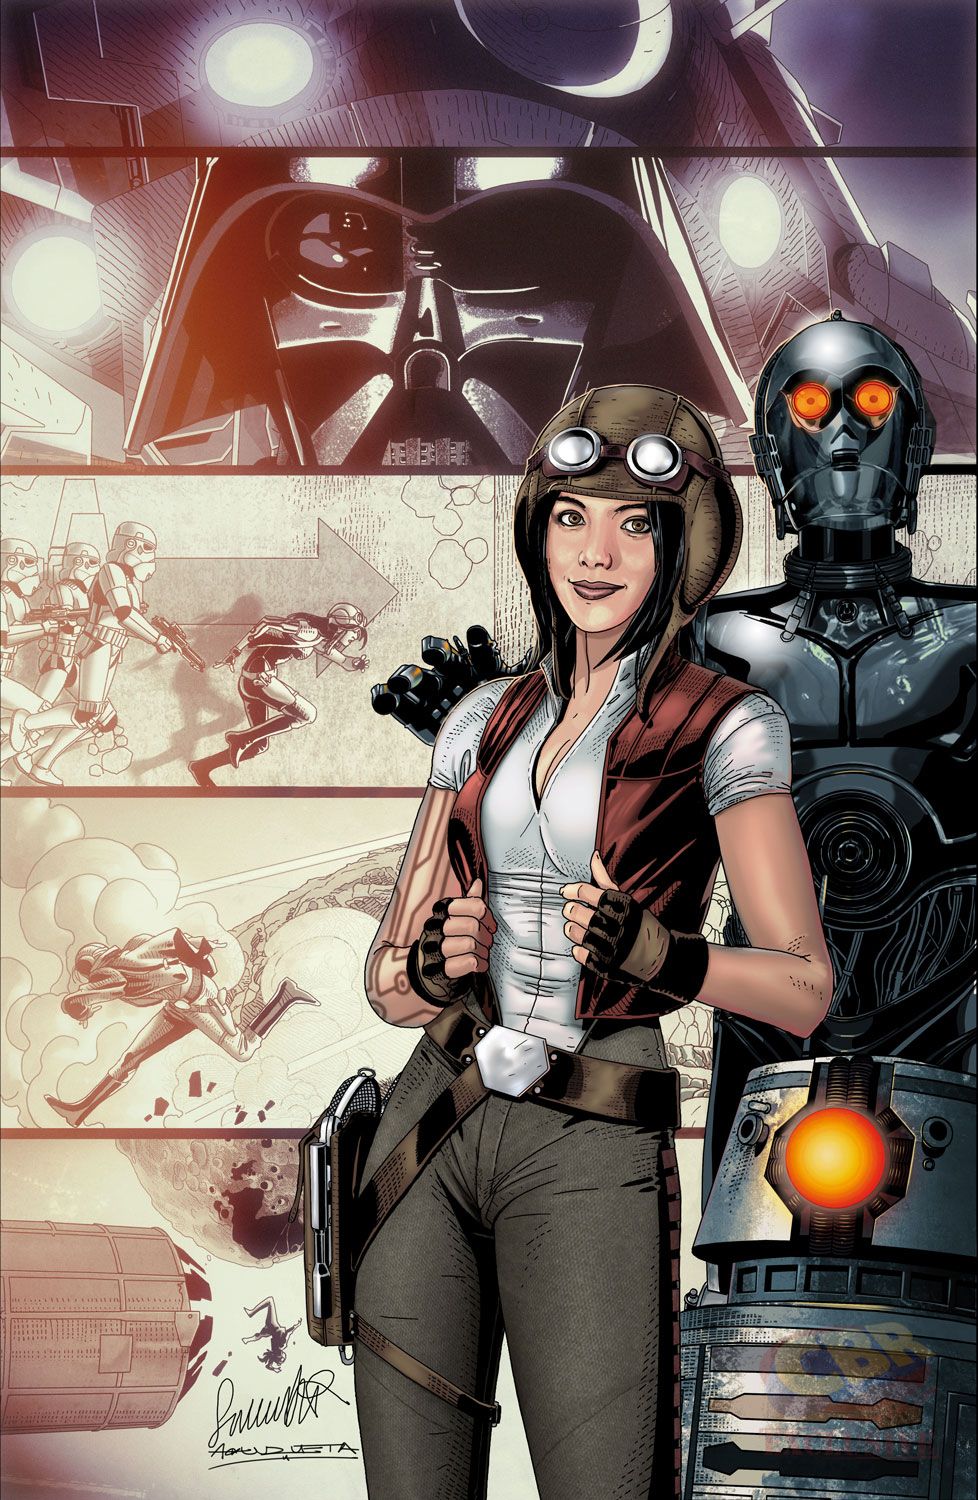 Star Wars: Doctor Aphra #1 Story So Far variant cover by Salvador Larroca.